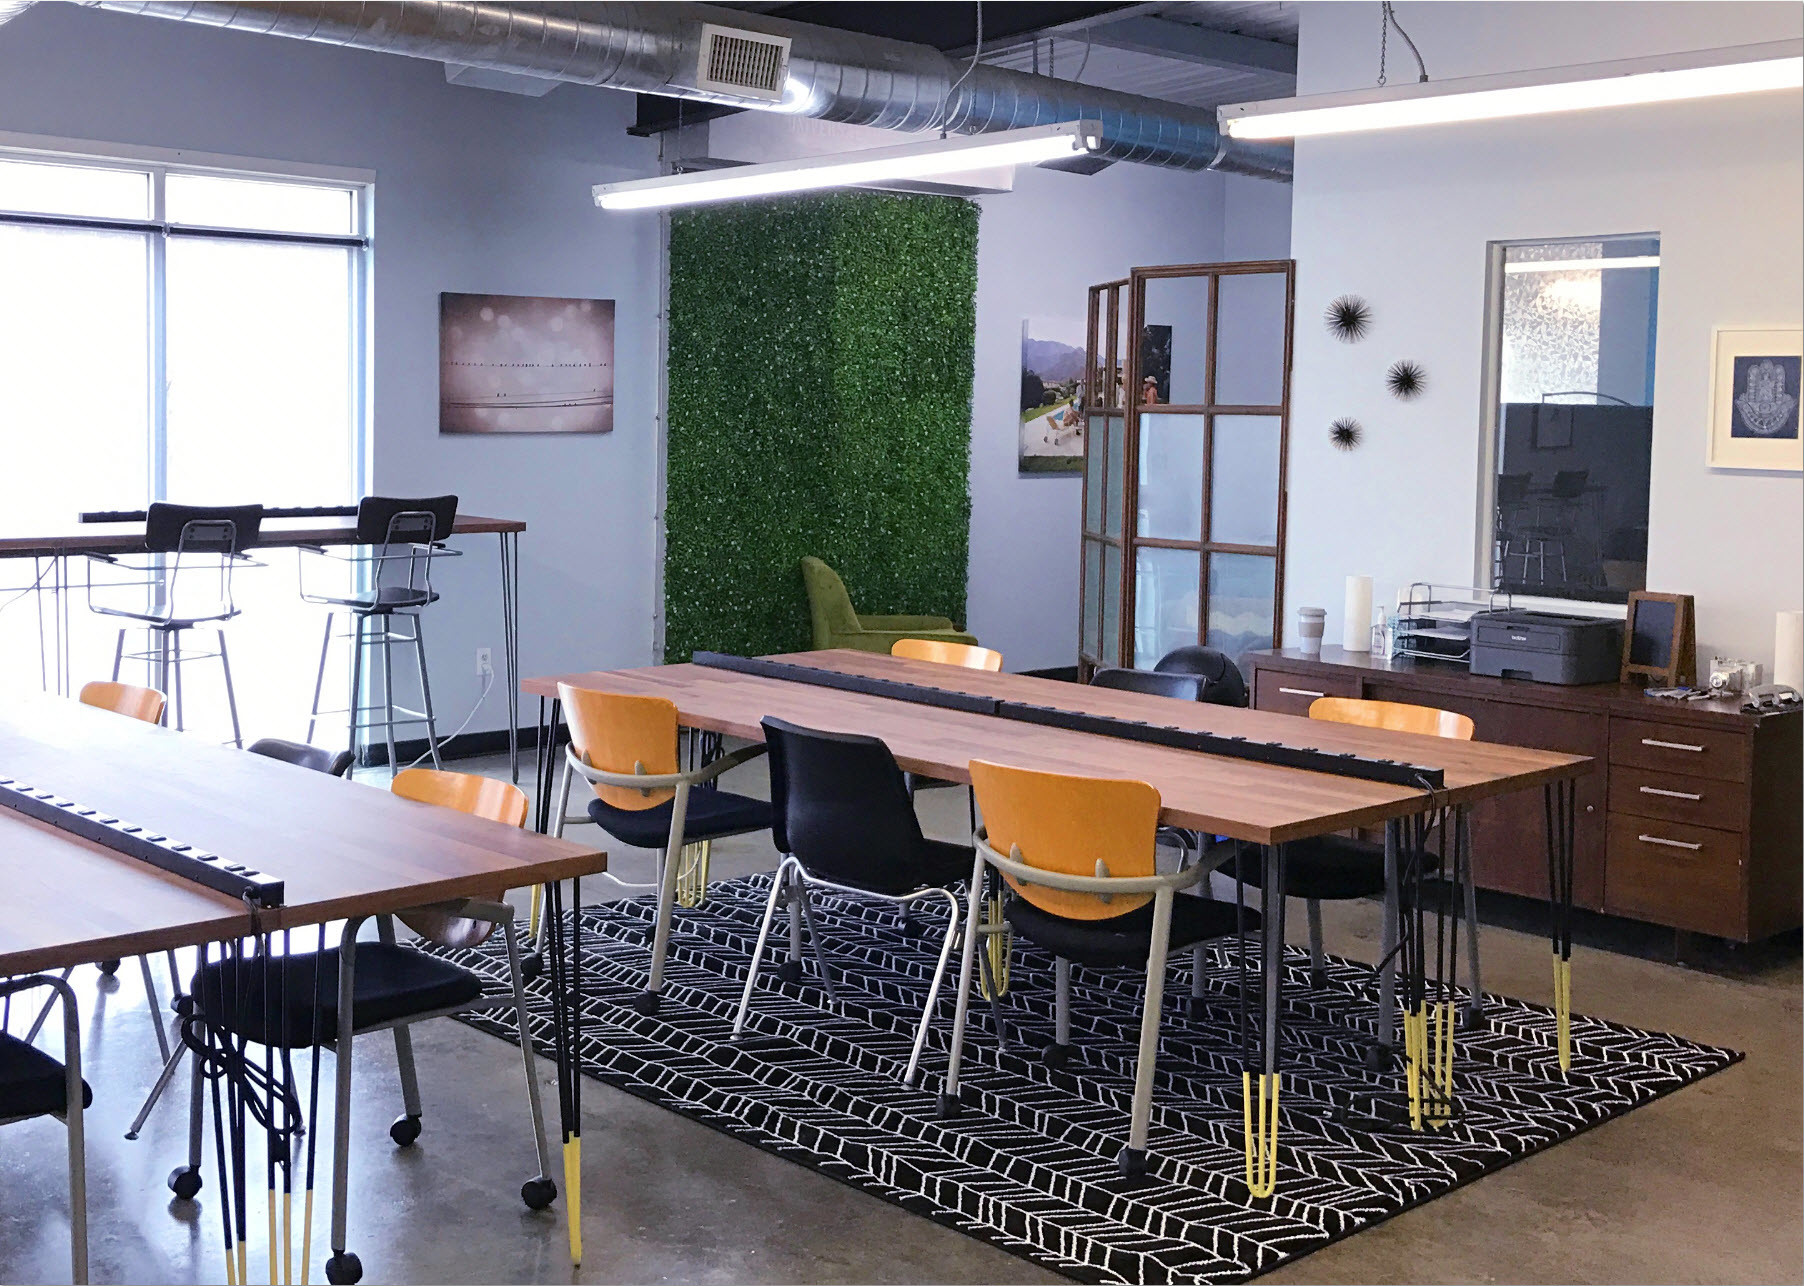 How This Austin Coworking Space Is Designed For Freelance Creatives